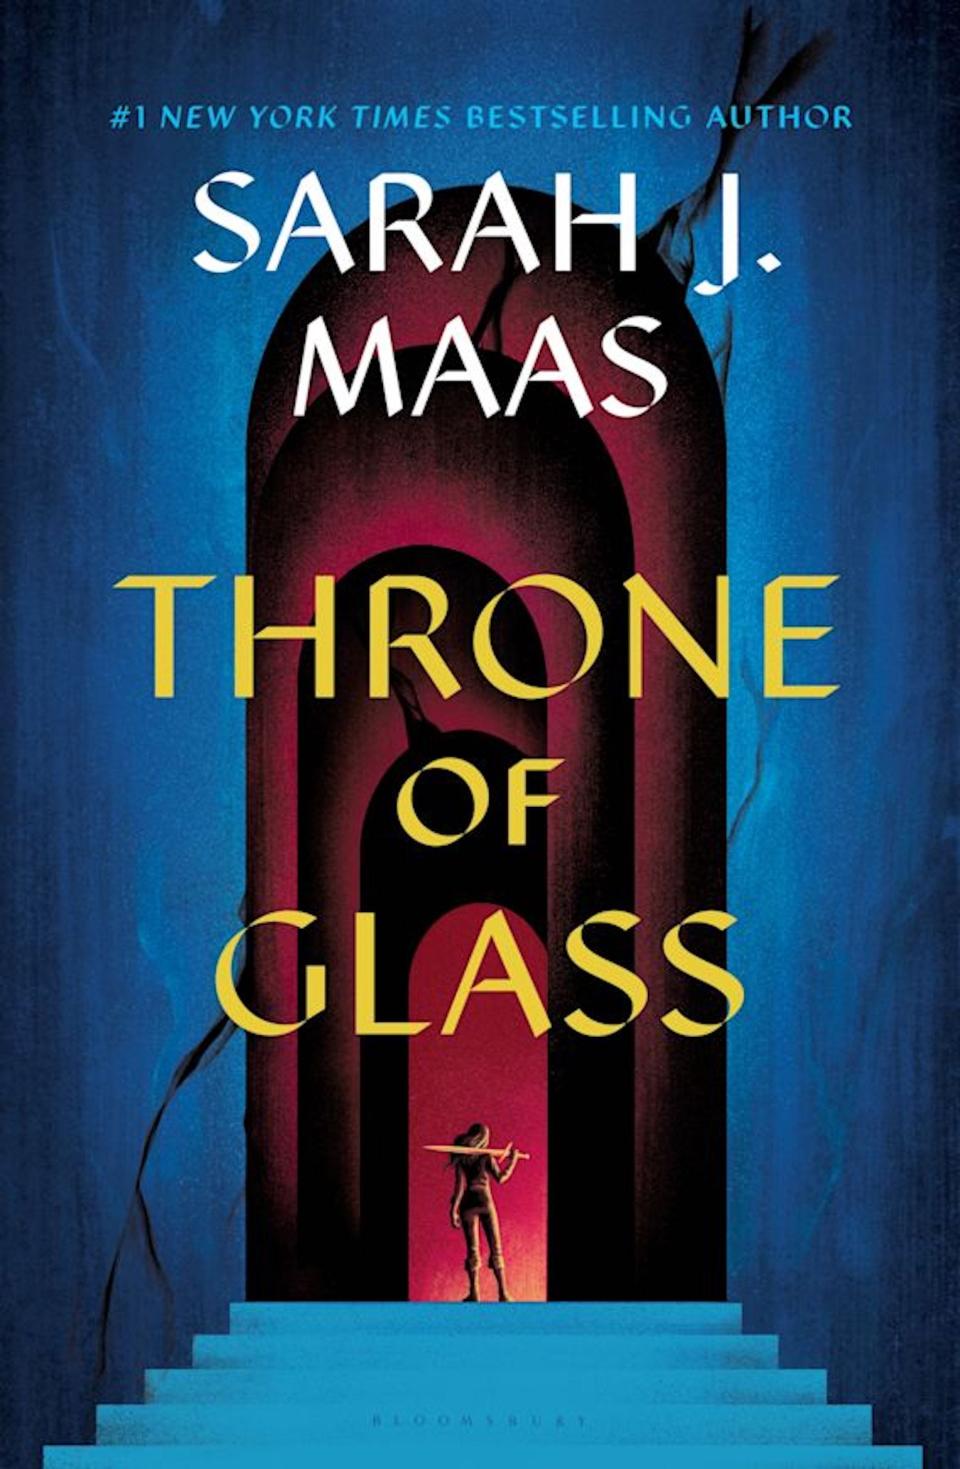 "Throne of Glass" by Sarah J. Mass.